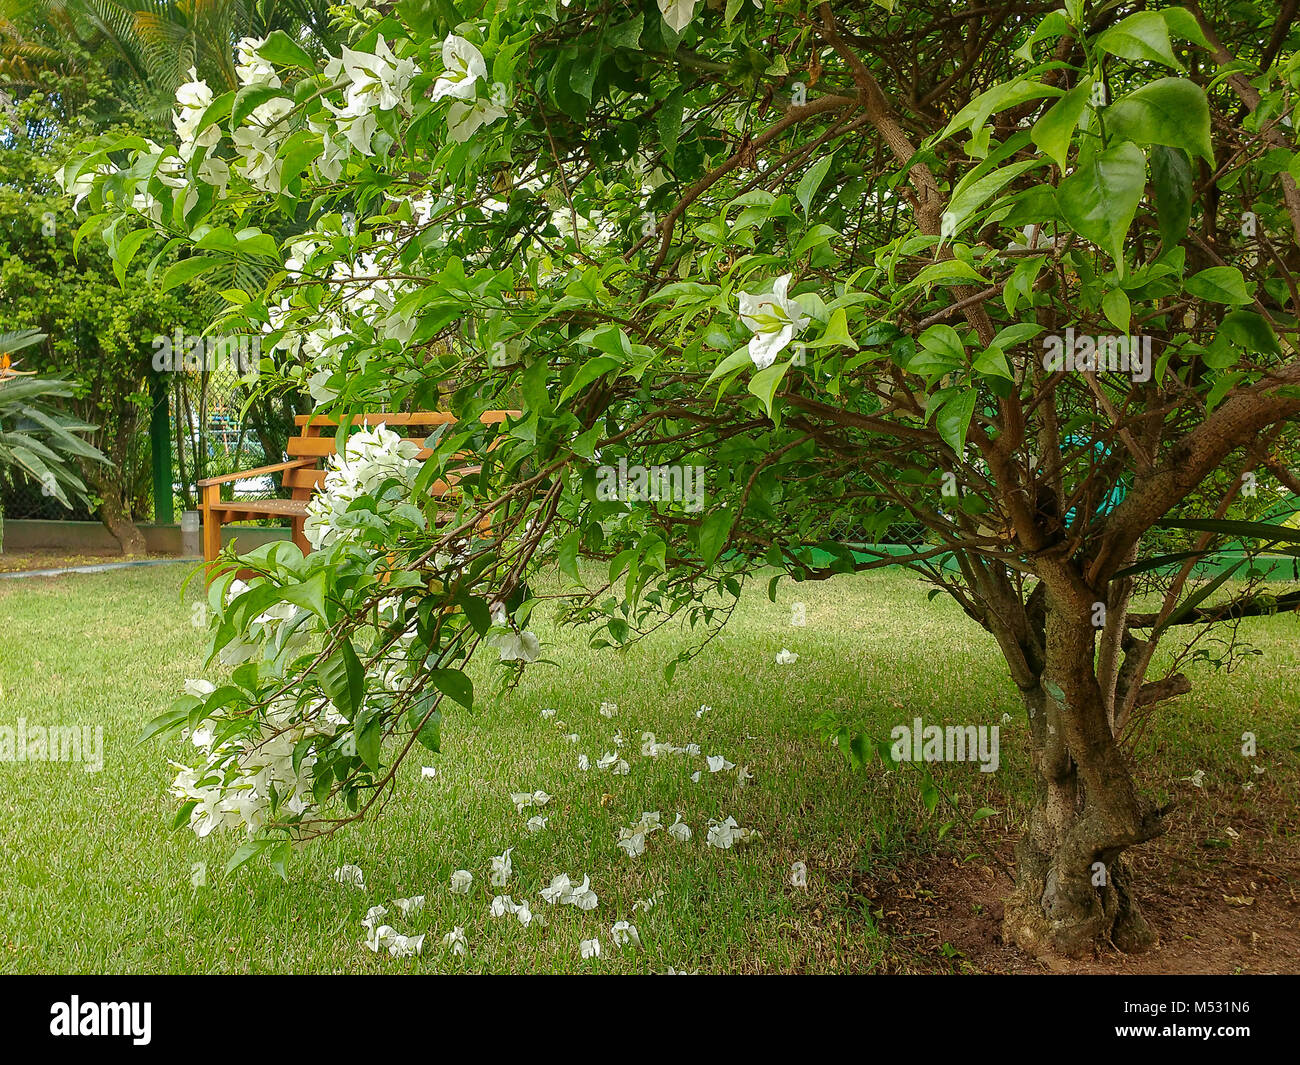 Flowery bush with wooden bench in the background Stock Photo